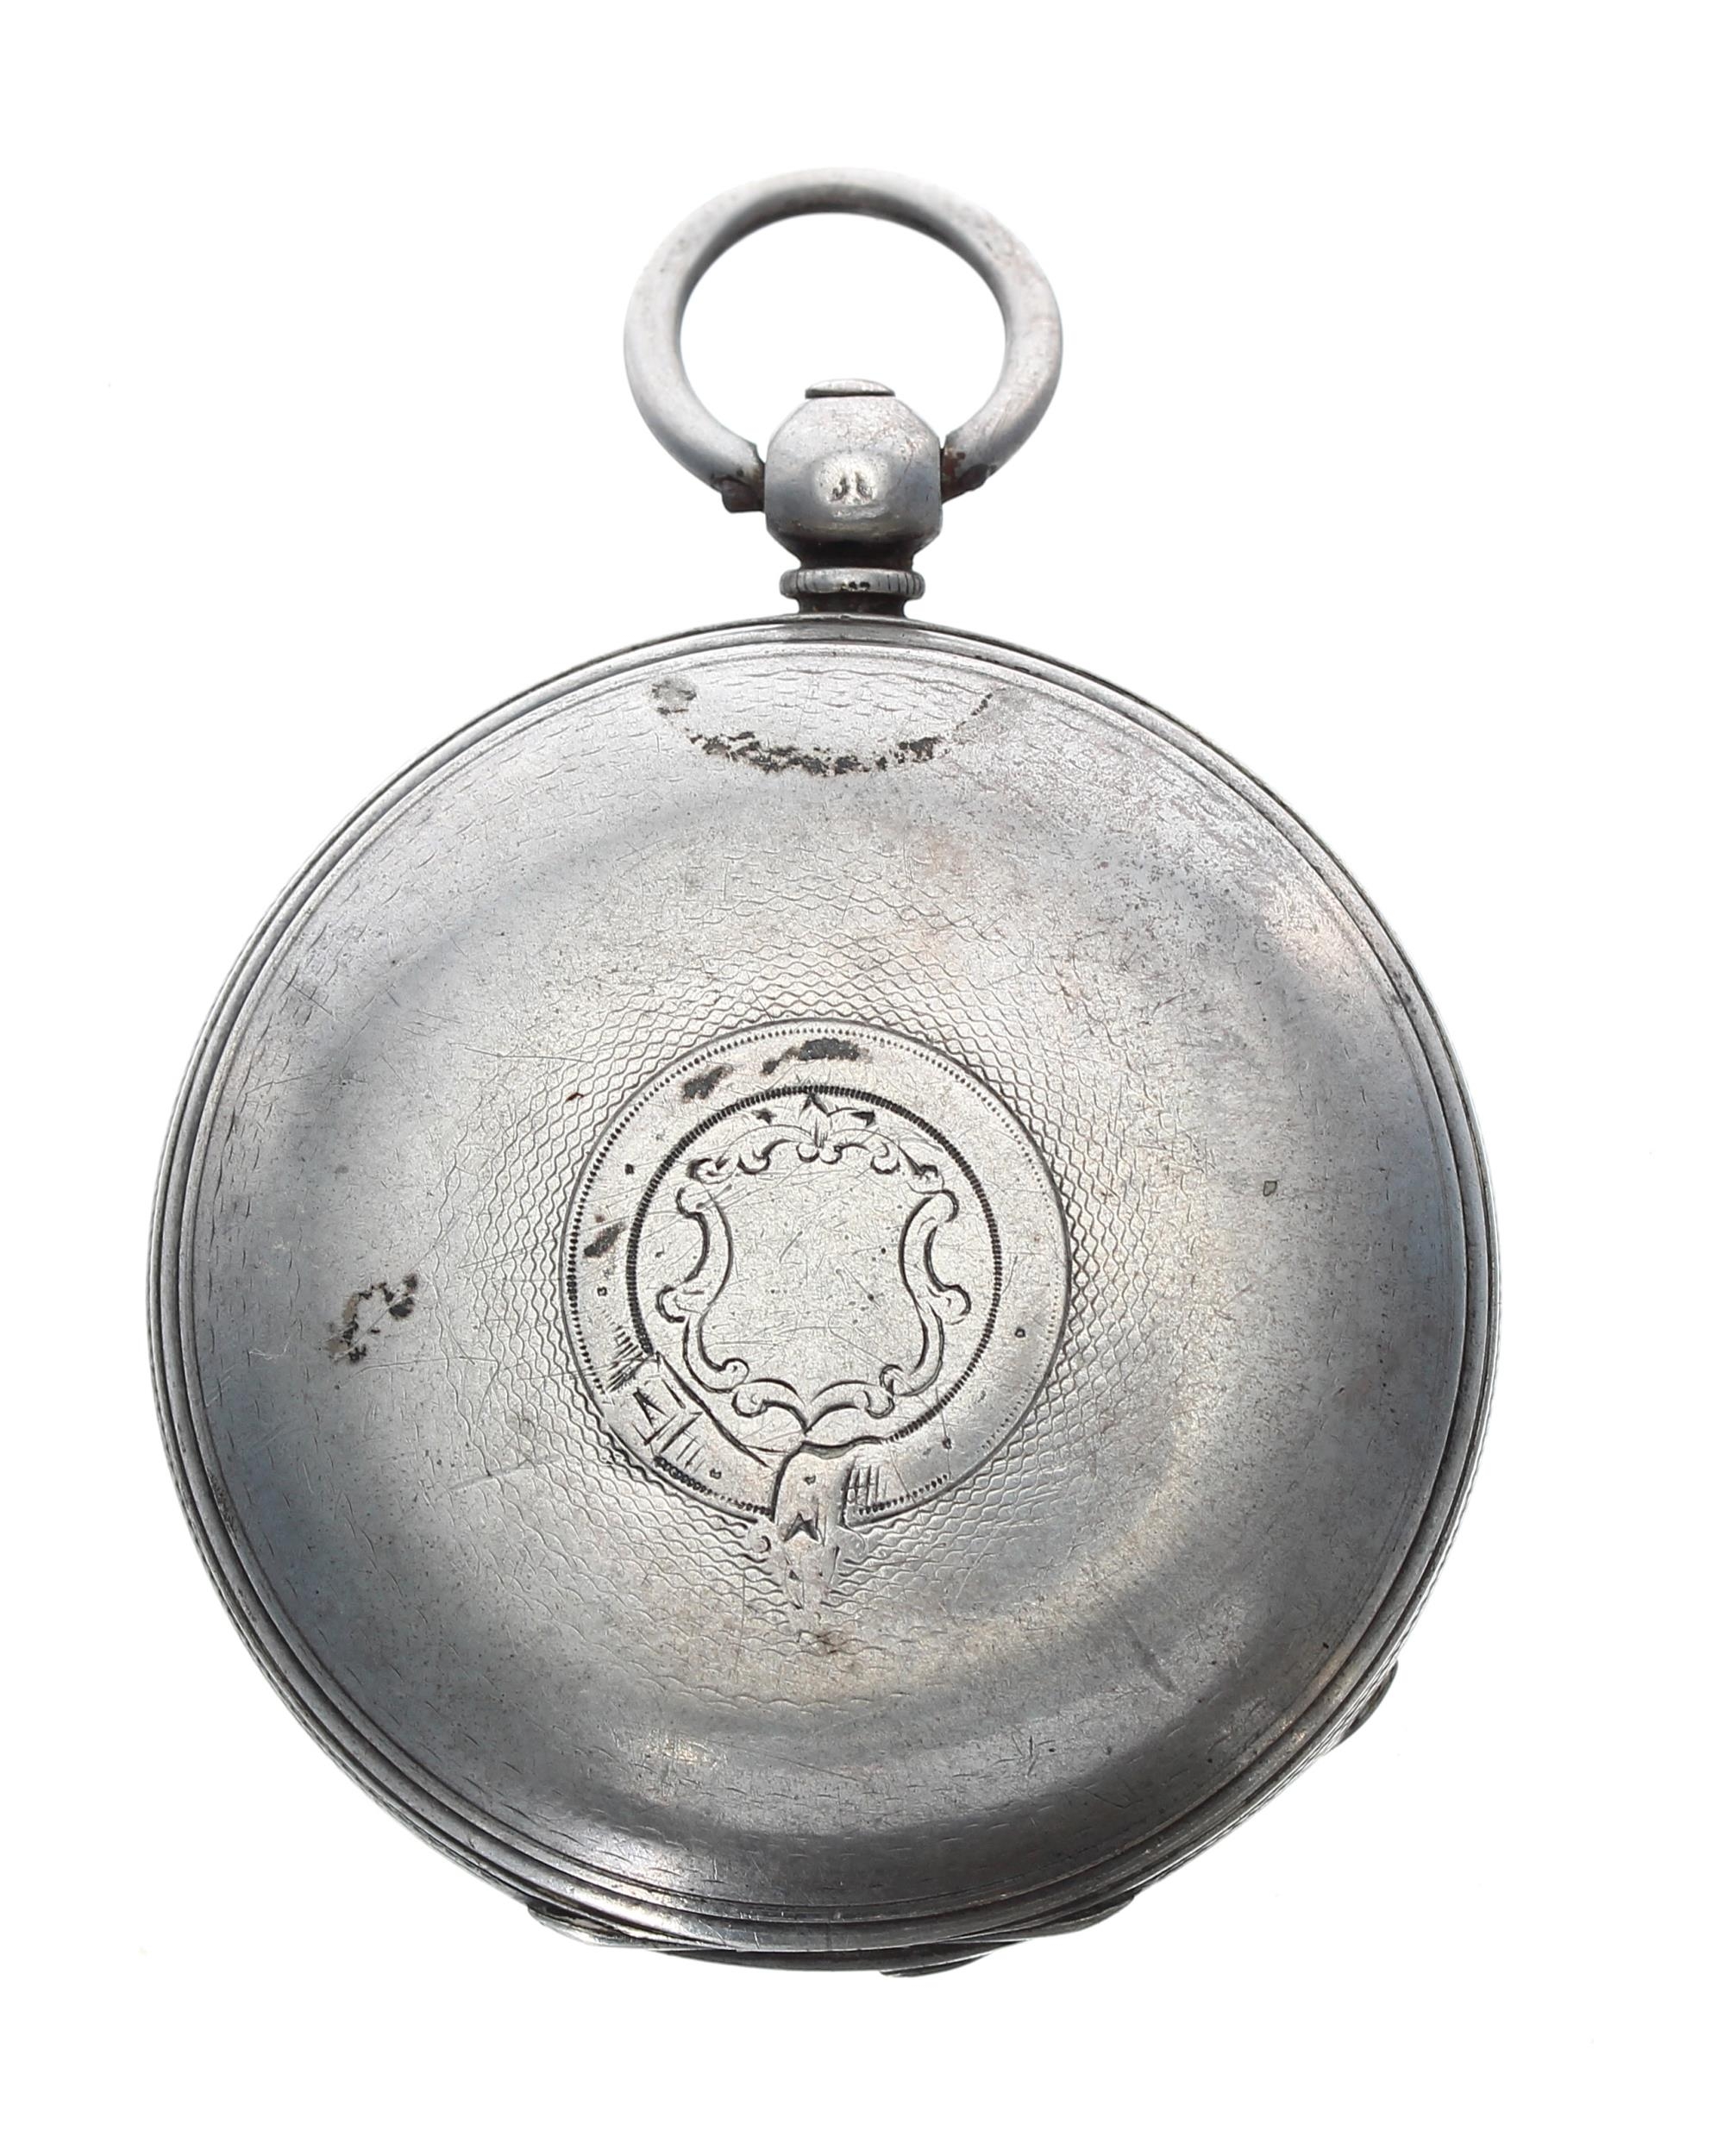 Victorian silver verge hunter pocket watch, London 1864, the fusee movement signed Johnson, Grays - Image 2 of 4